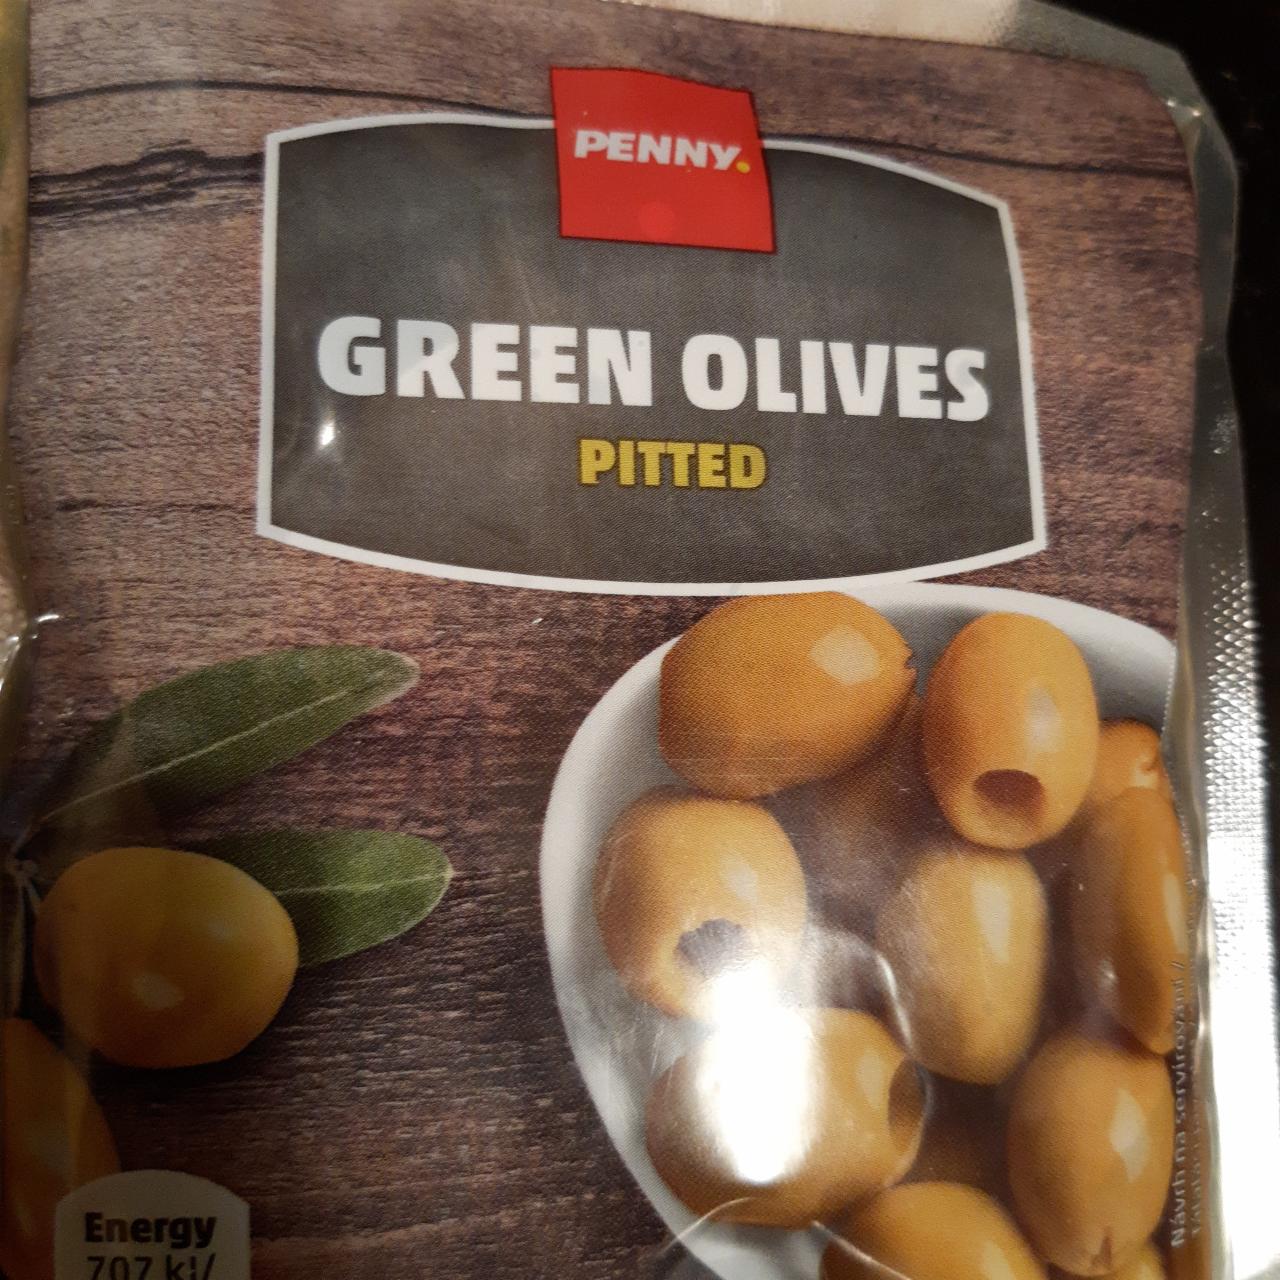 Fotografie - Green Olives Pitted Penny